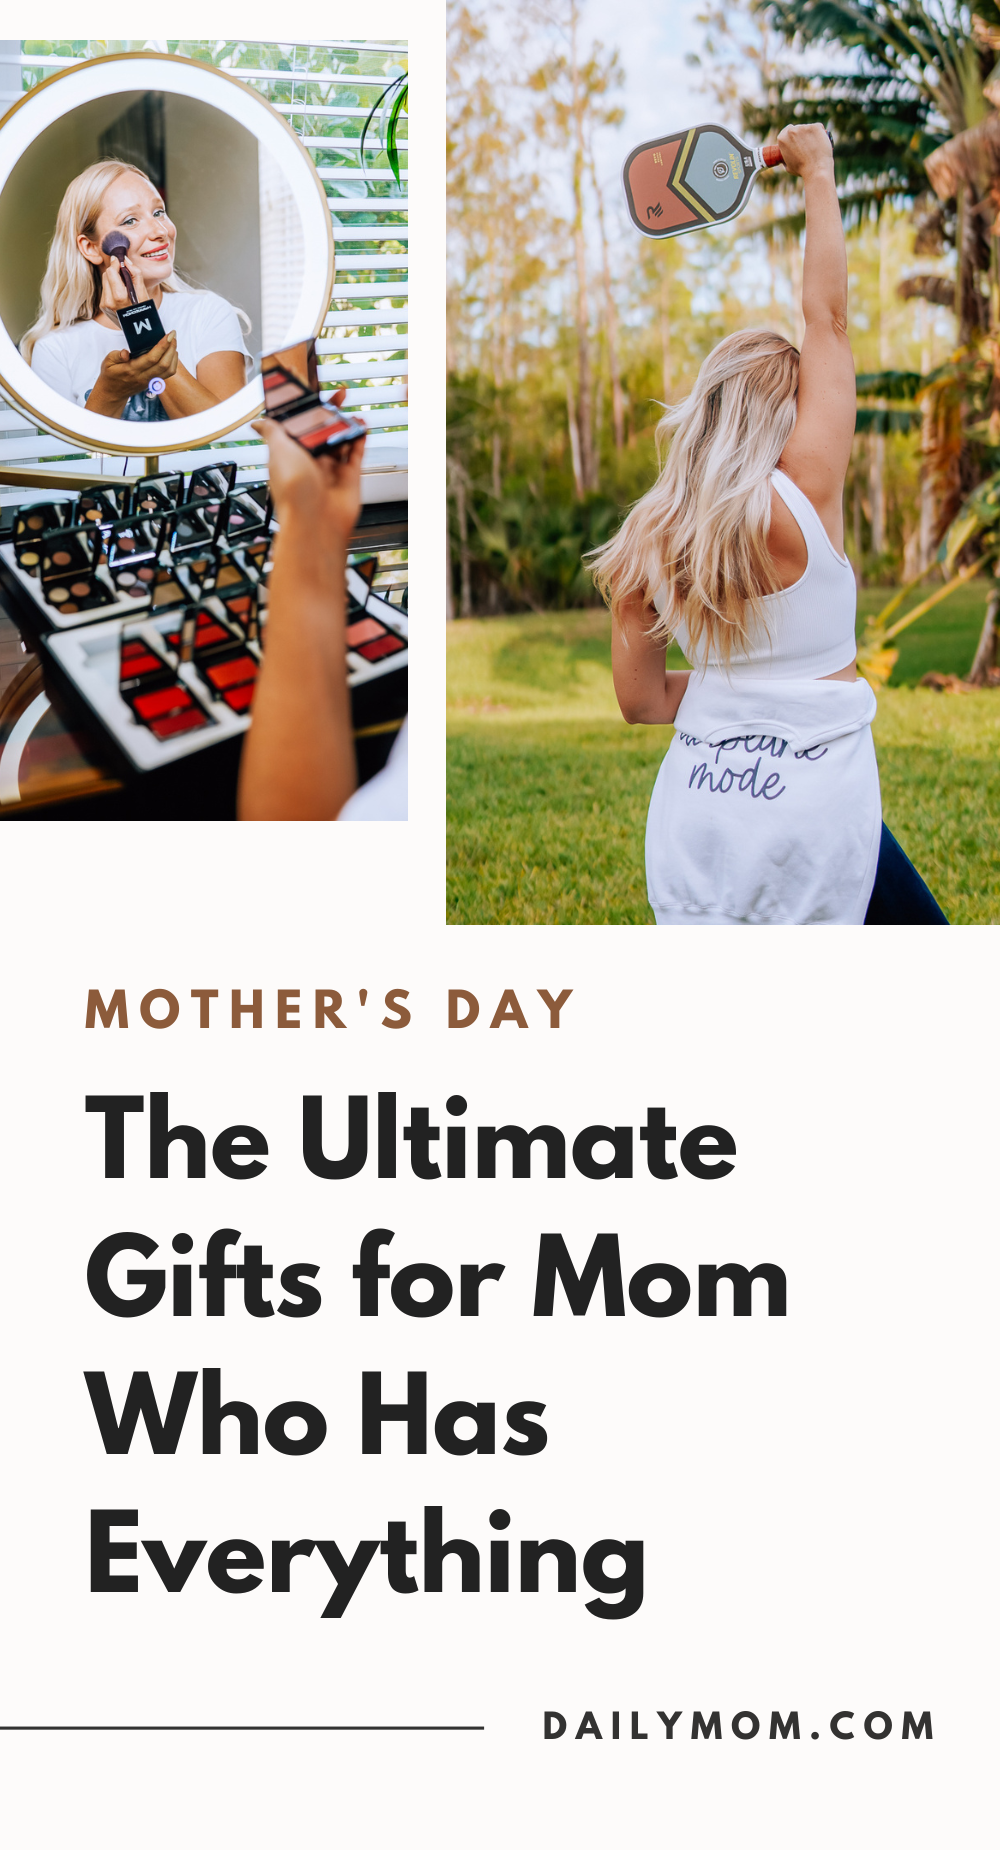 The Ultimate Gifts For Moms Who Have Everything: Editor's Picks